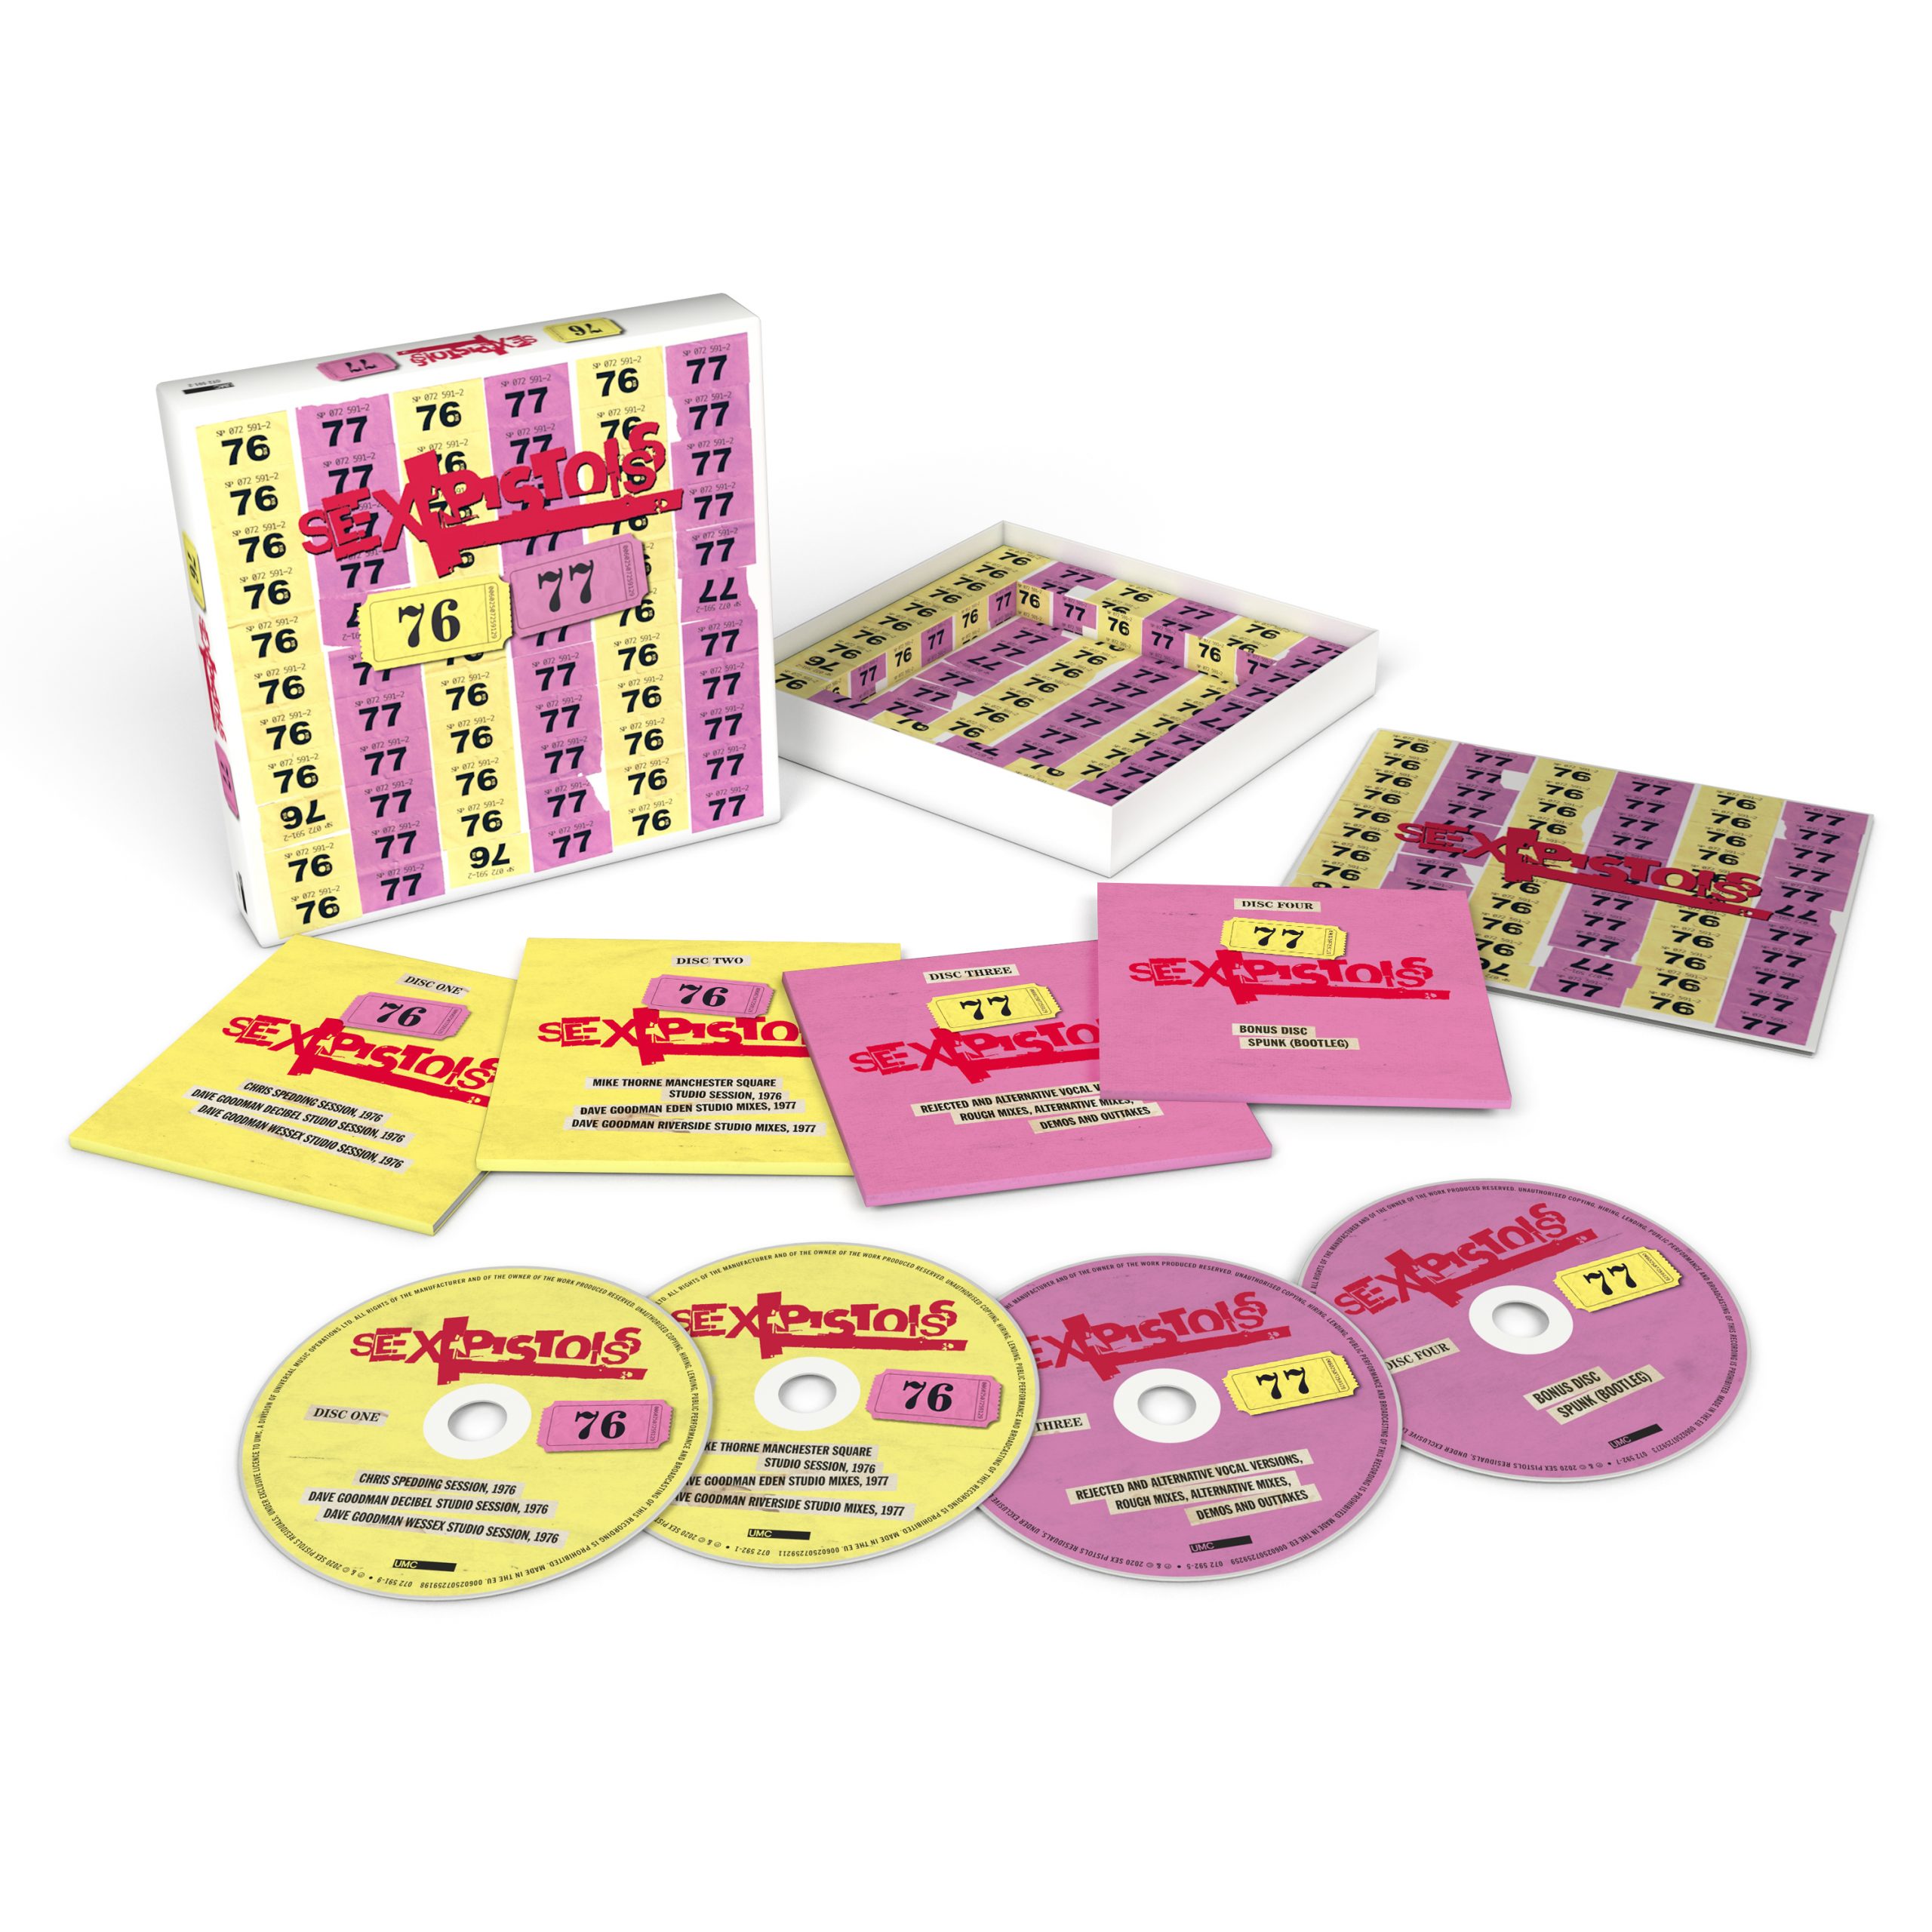 Sex Pistols 76-77 – Comprehensive 4 CD demos and outtakes 